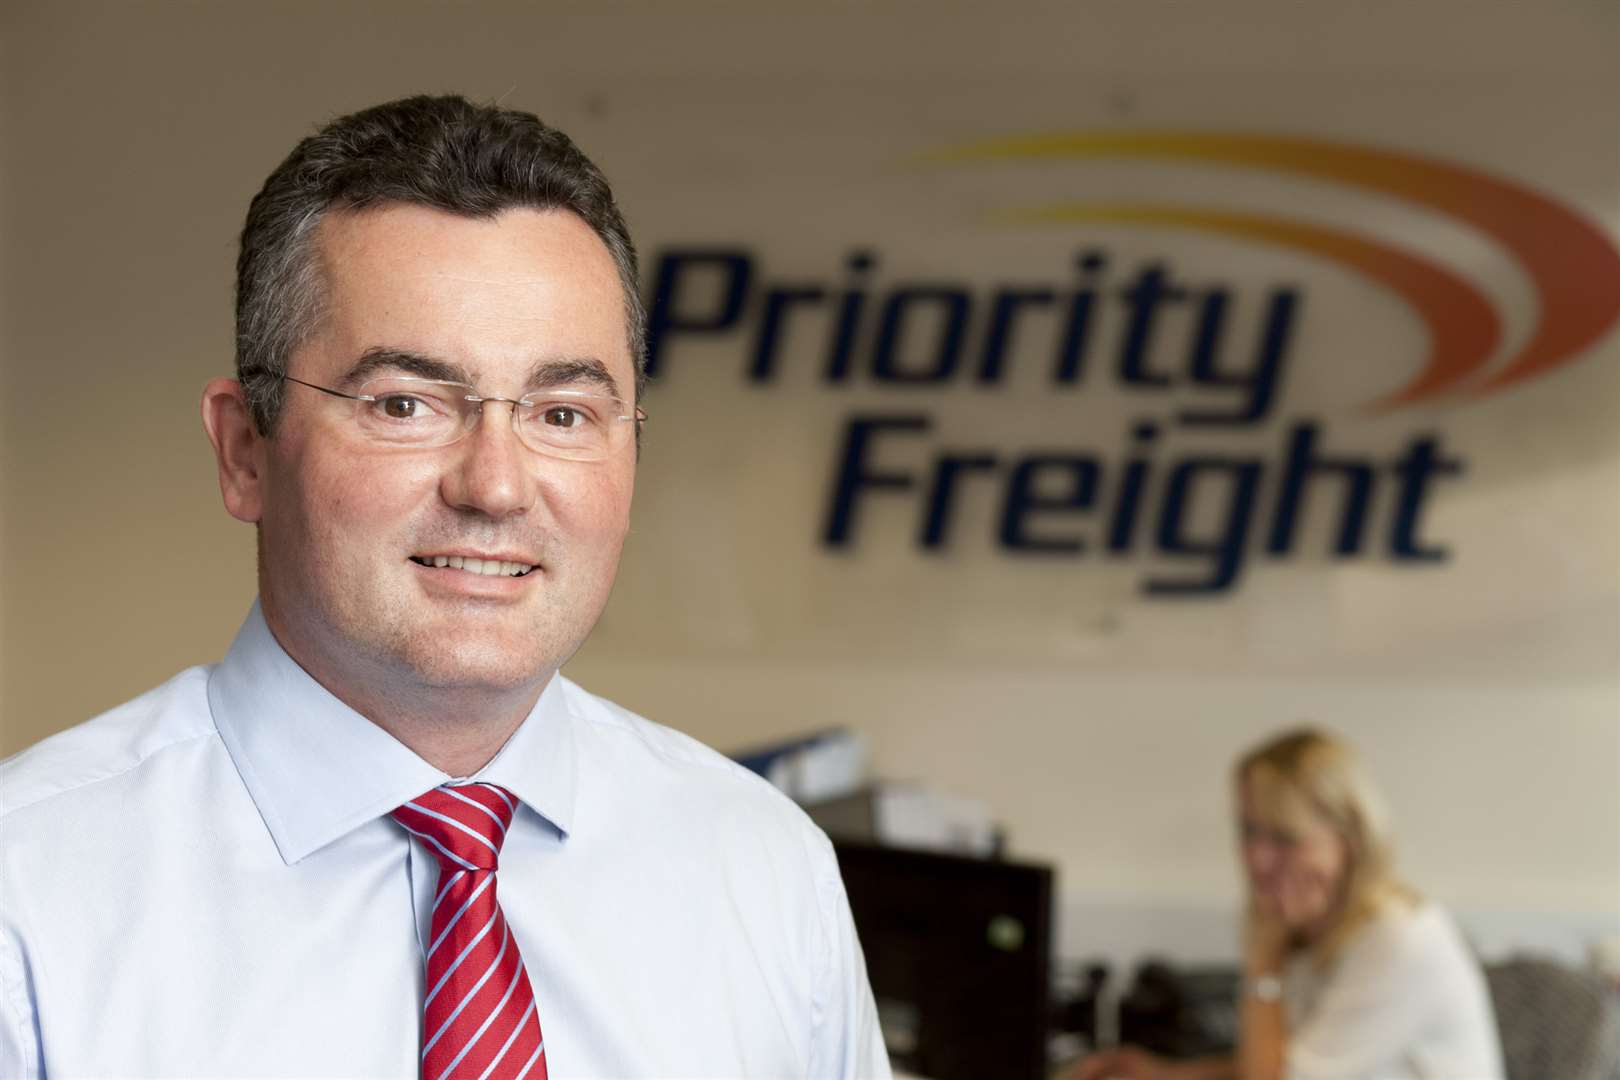 Priority Freight managing director Neal Williams